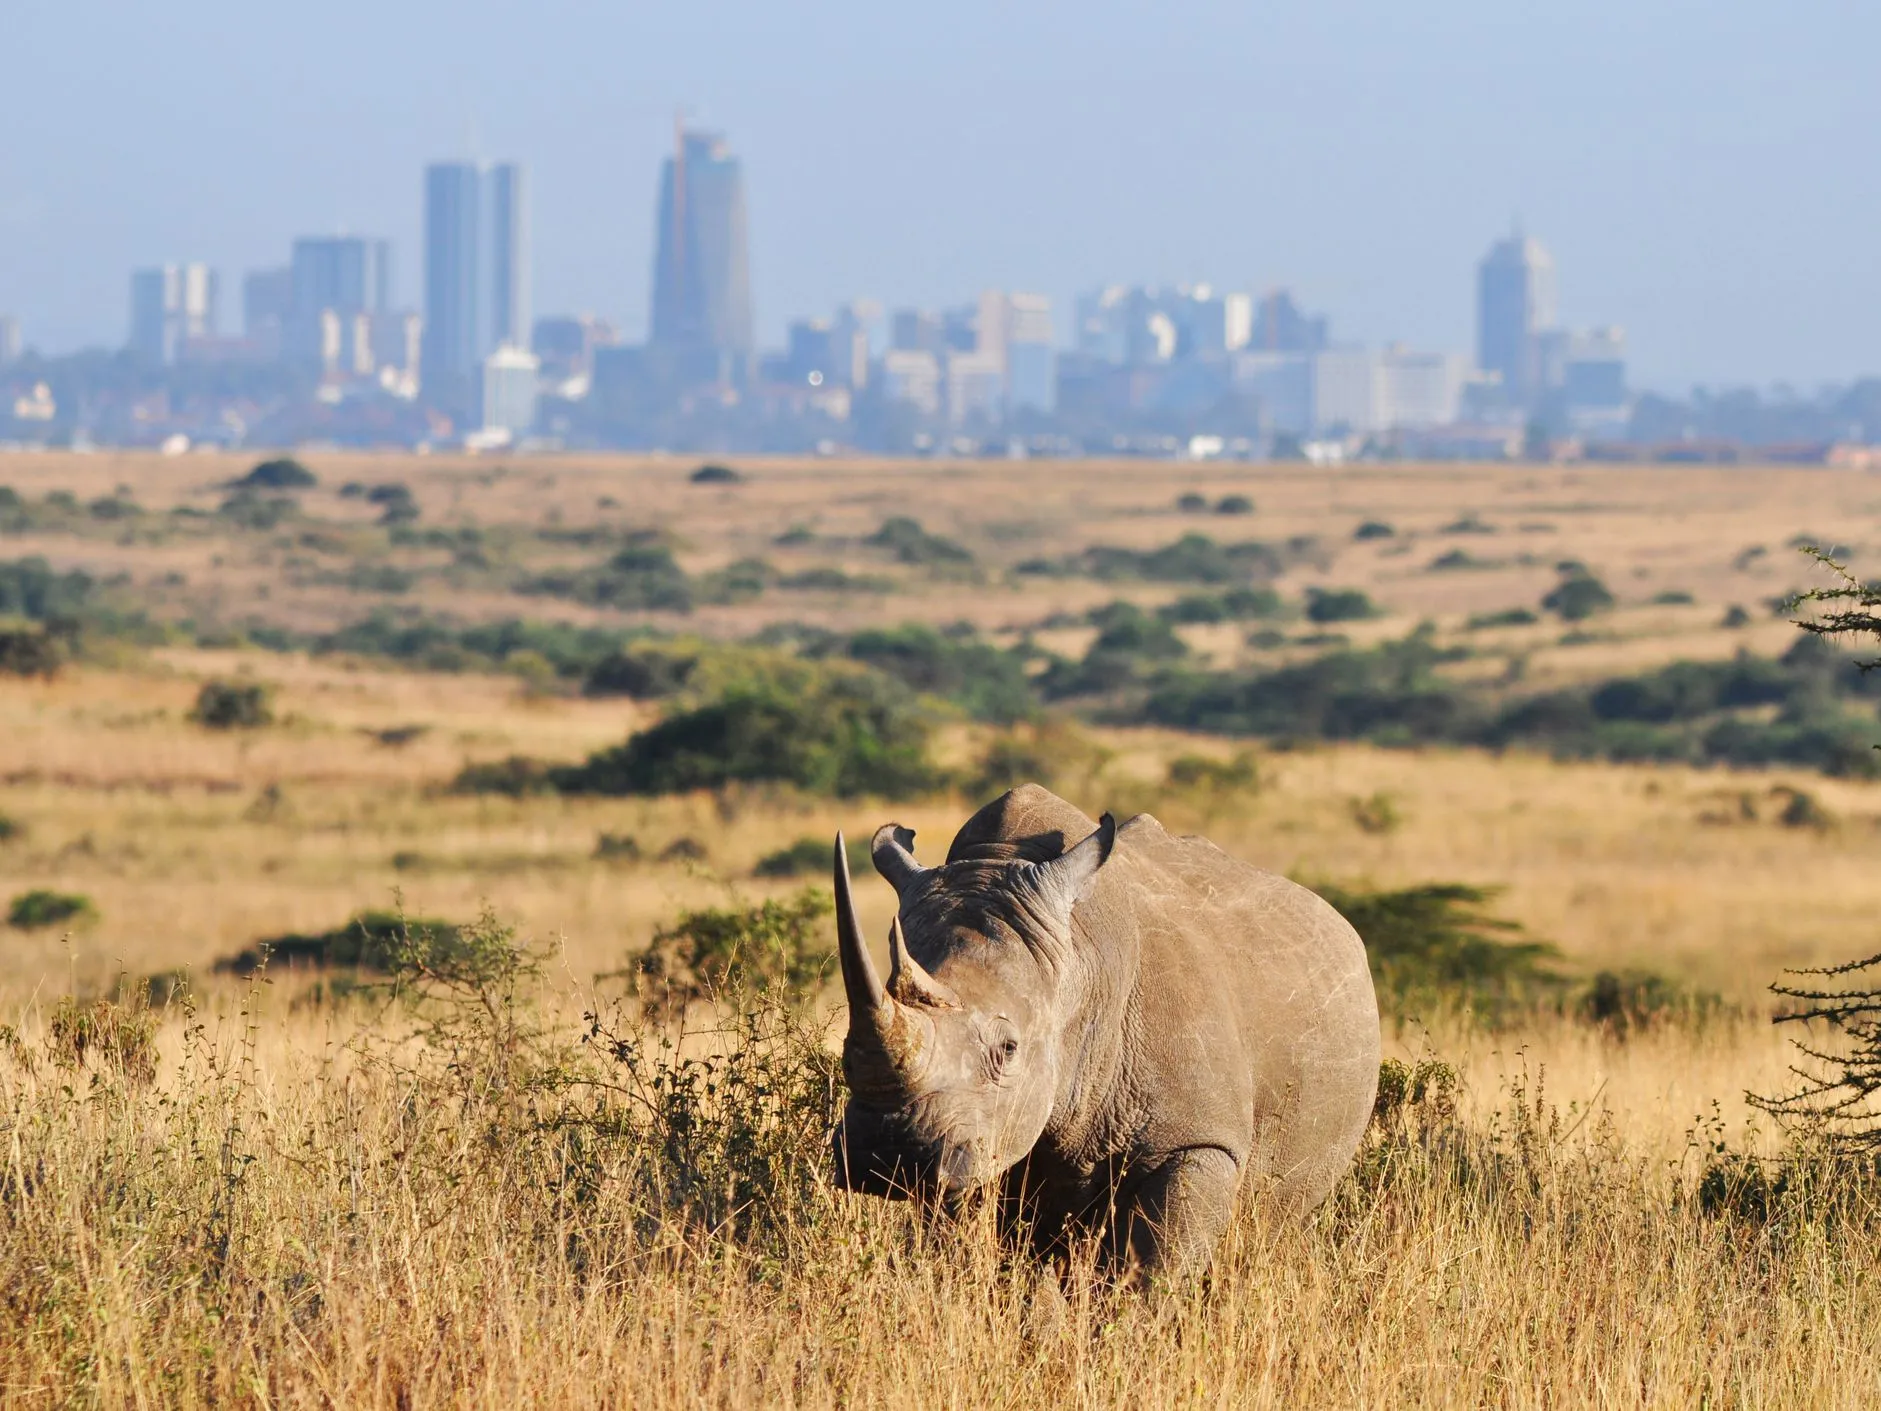 A look into Nairobi National Park charges - a rhino in the Nairobi National Park